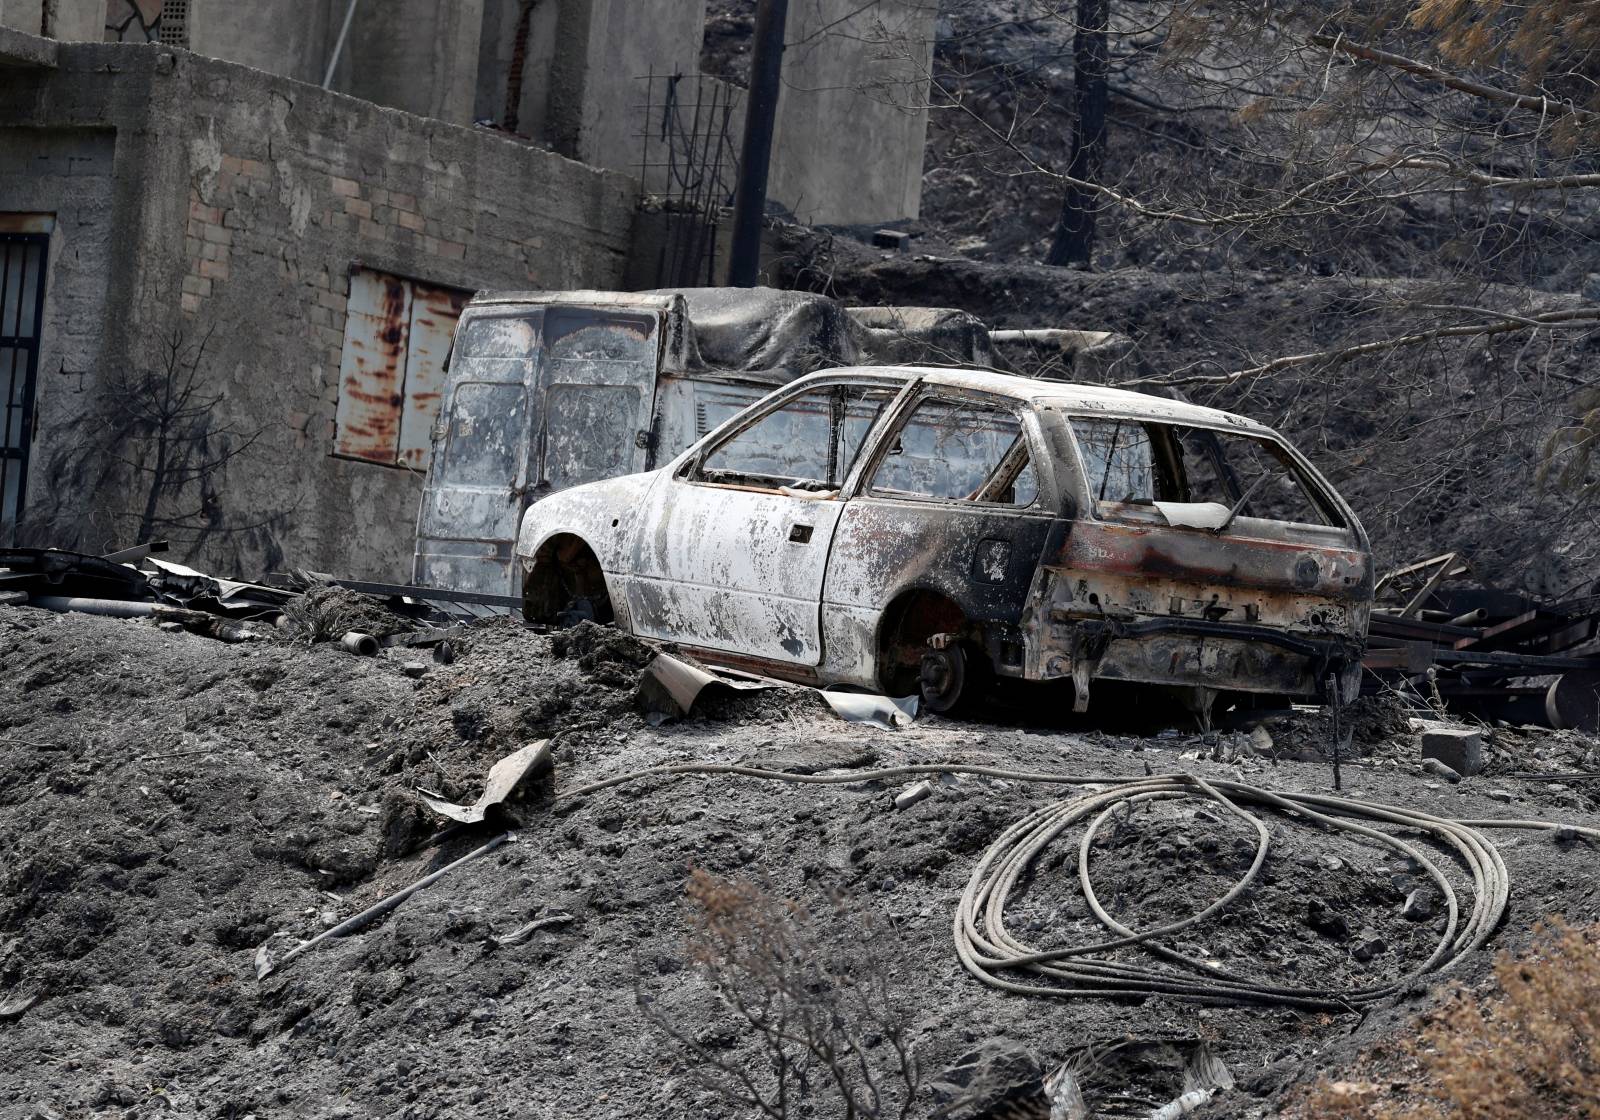 Burned house and cars are seen following a wildfire near the village of Melini, in the Larnaca mountain region